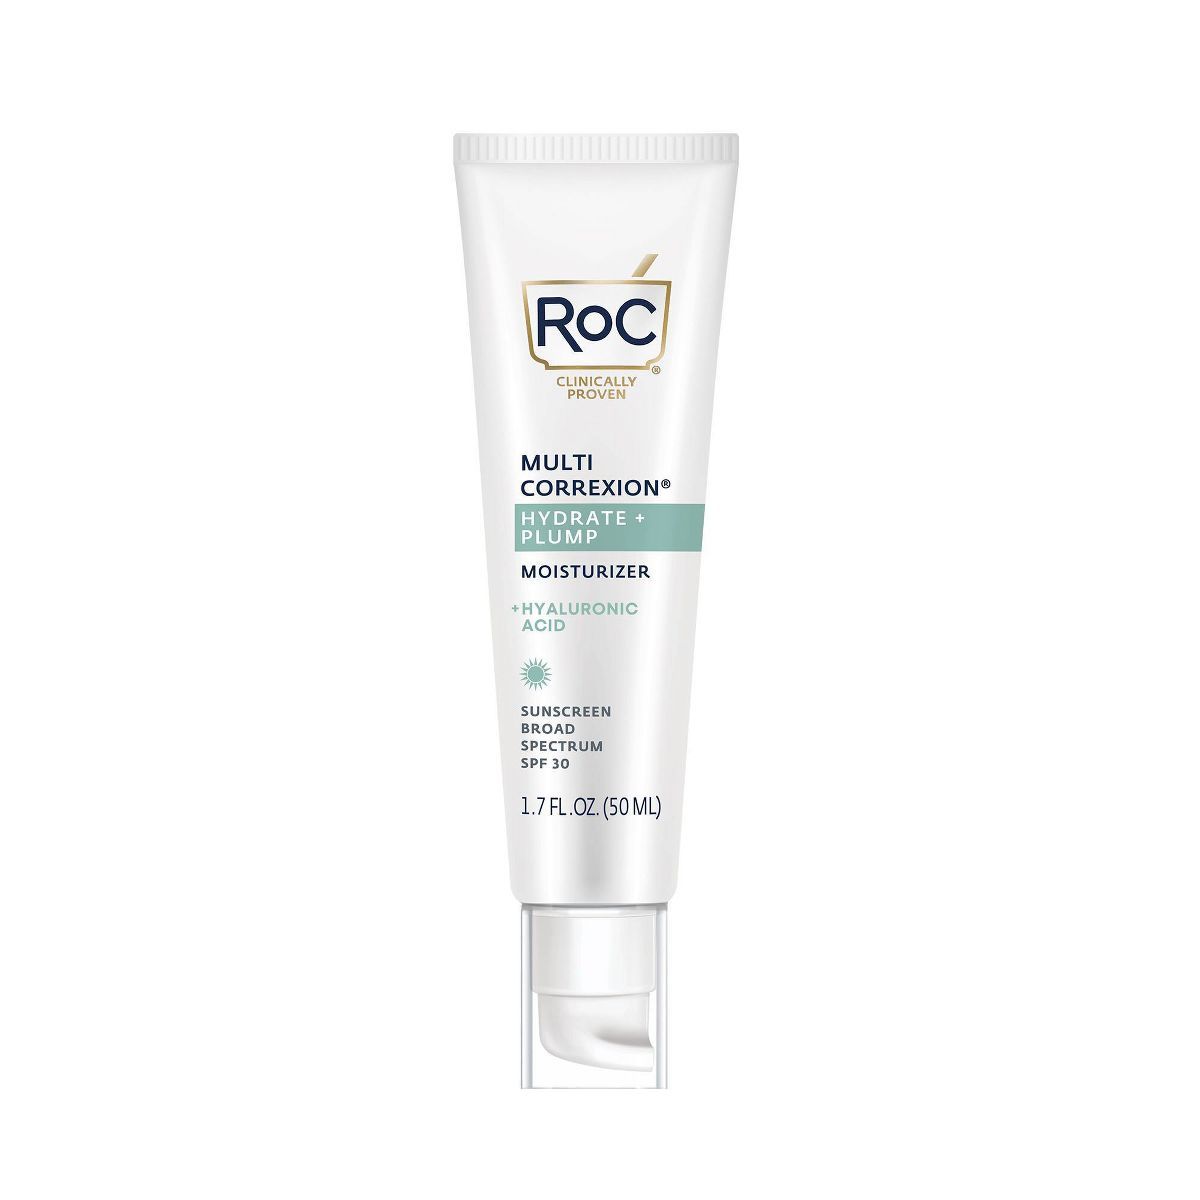 RoC Multi Correxion Hydrate + Plump Daily Moisturizer with Hyaluronic Acid - SPF 30 - 1.7oz | Target